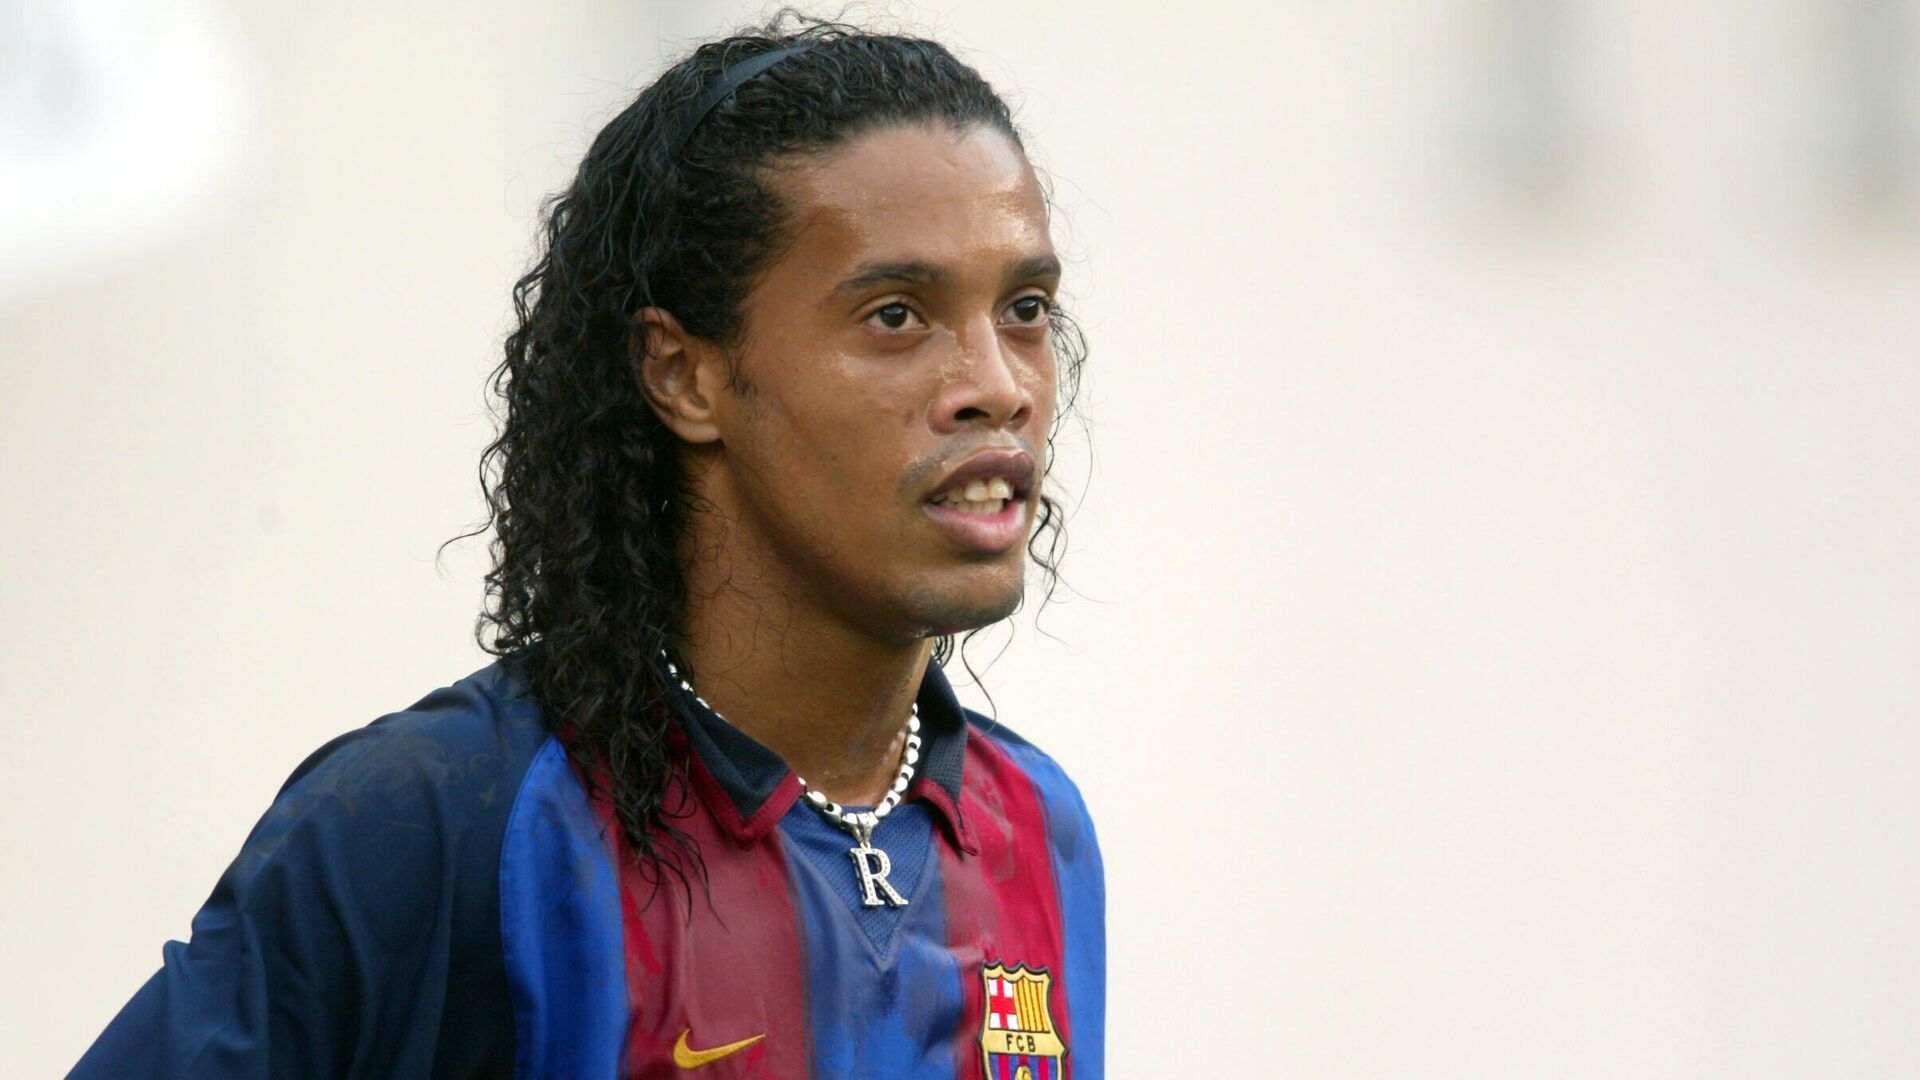 The media found out which club will play Ronaldinho's son - News Unrolled